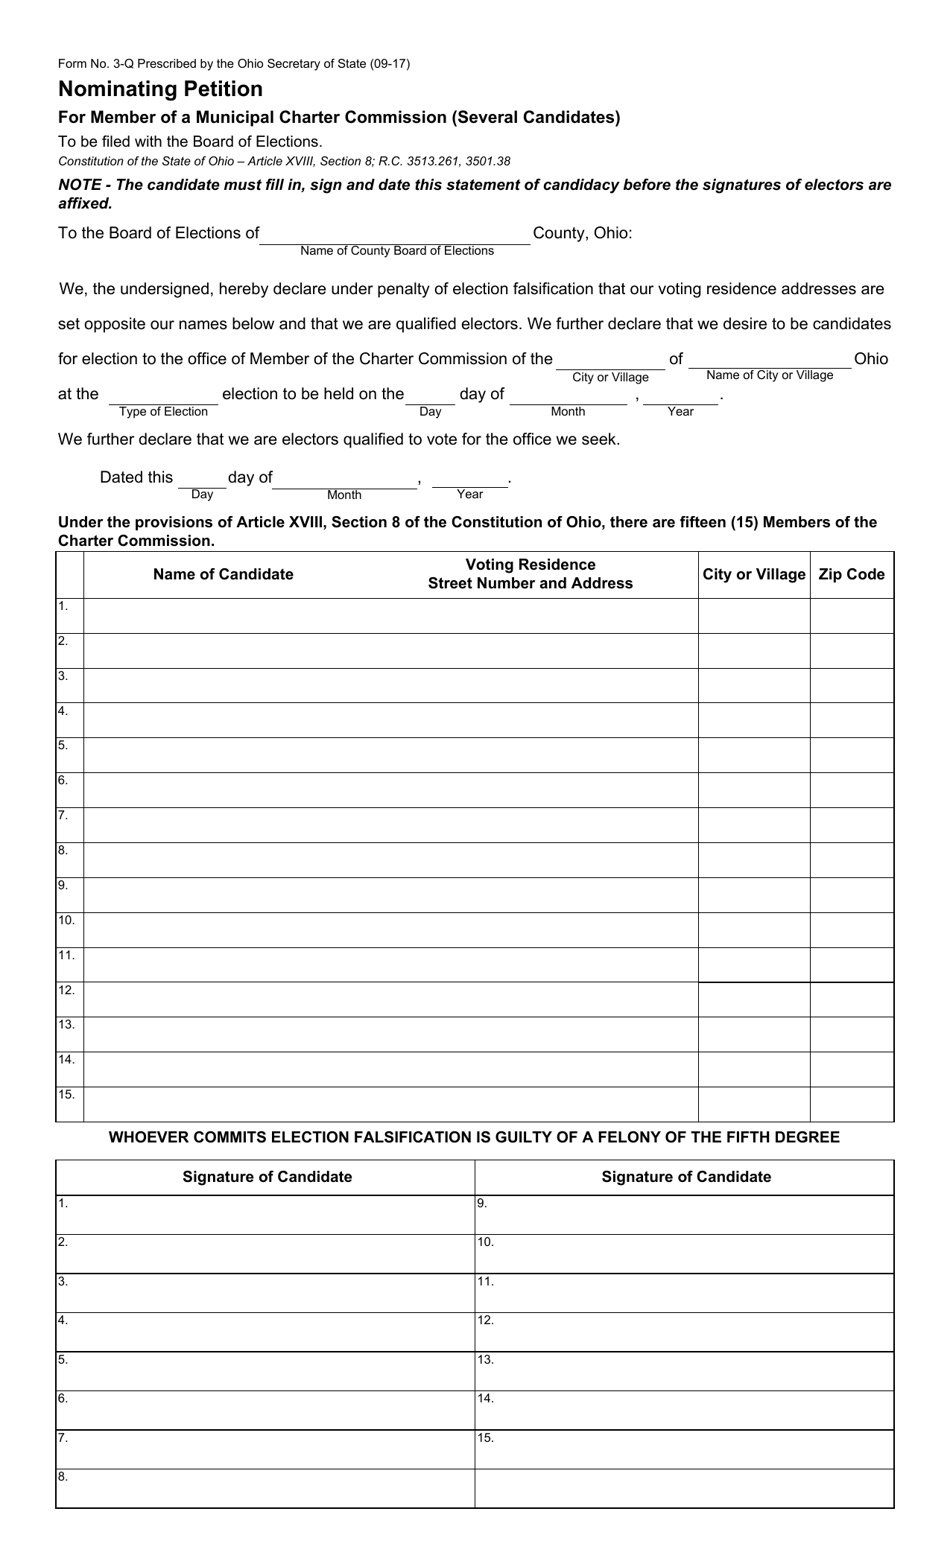 Form 3-Q Nominating Petition for Member of a Municipal Charter Commission (Several Candidates) - Ohio, Page 1